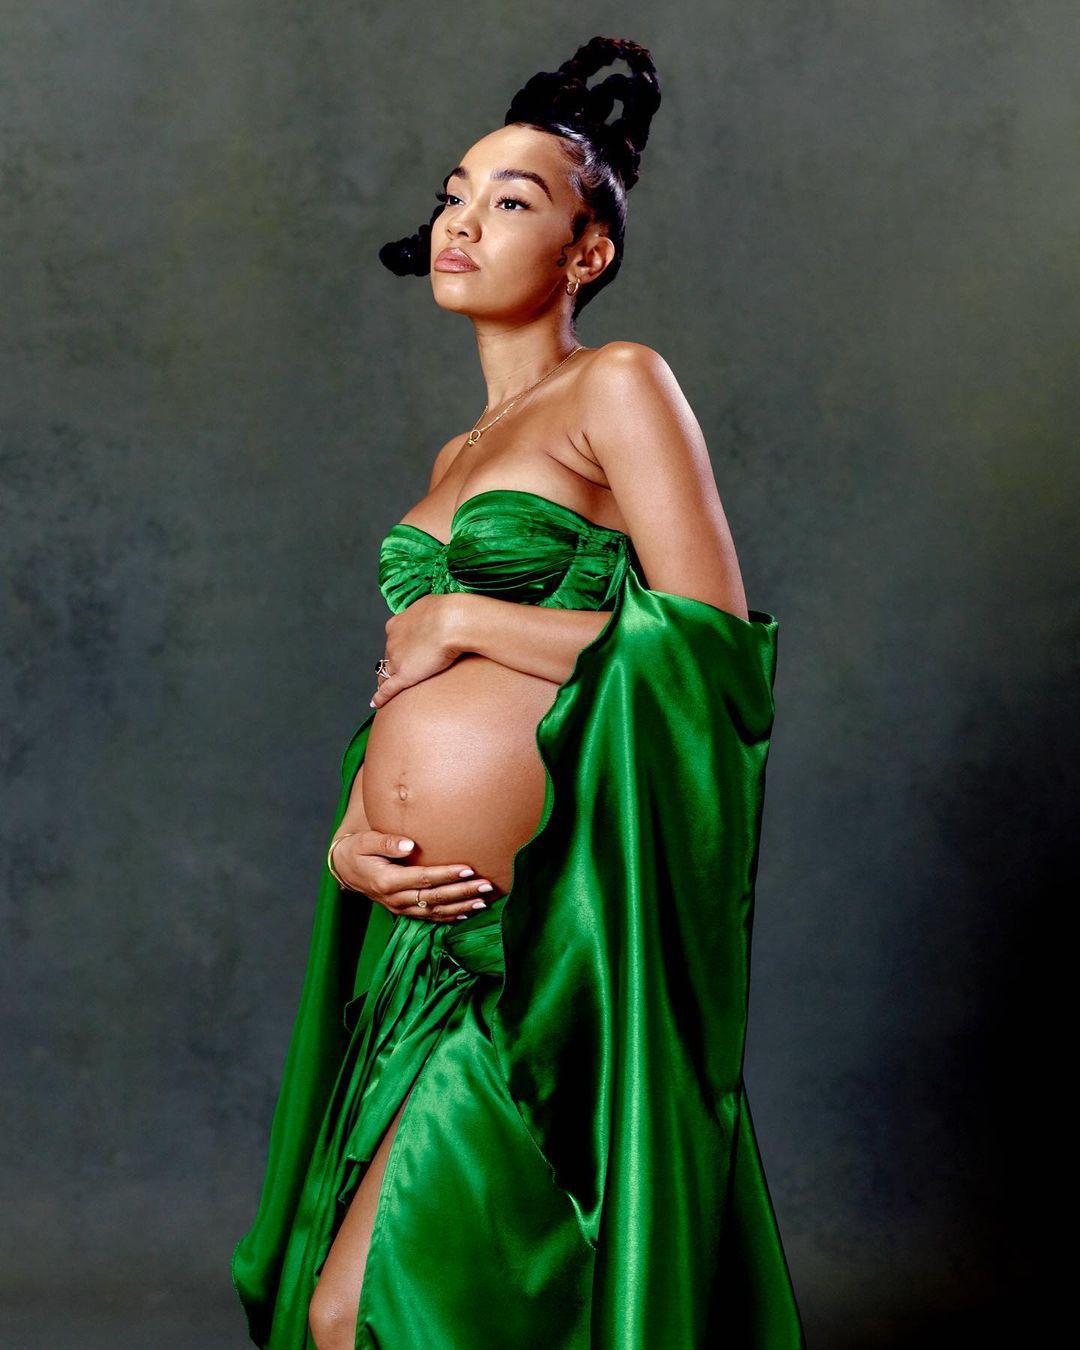 Little Mix’s Leigh-Anne Pinnock is pregnant